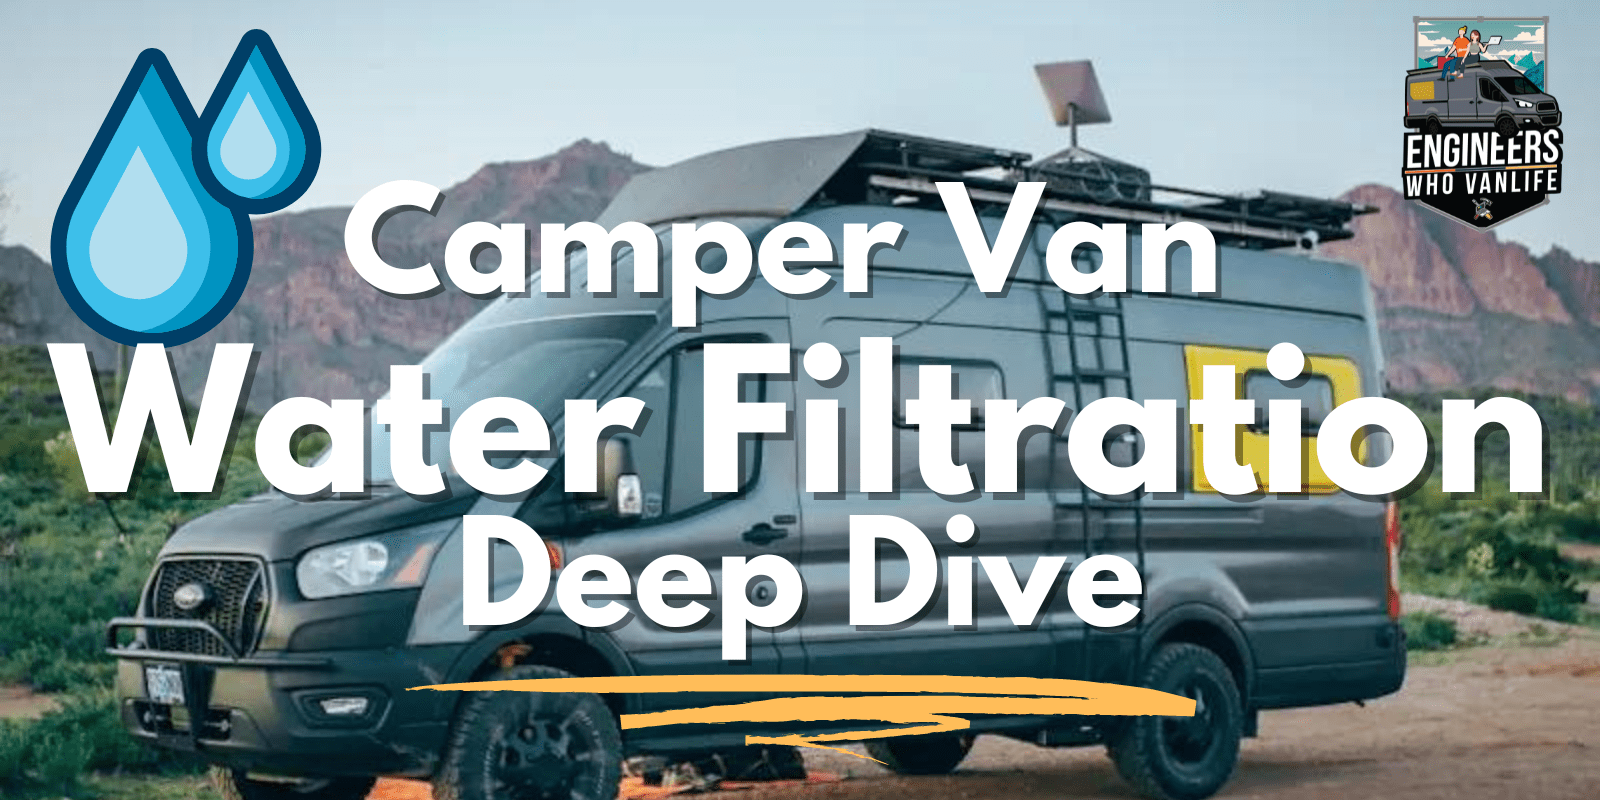 Building a Portable DIY RV Water Filtration System